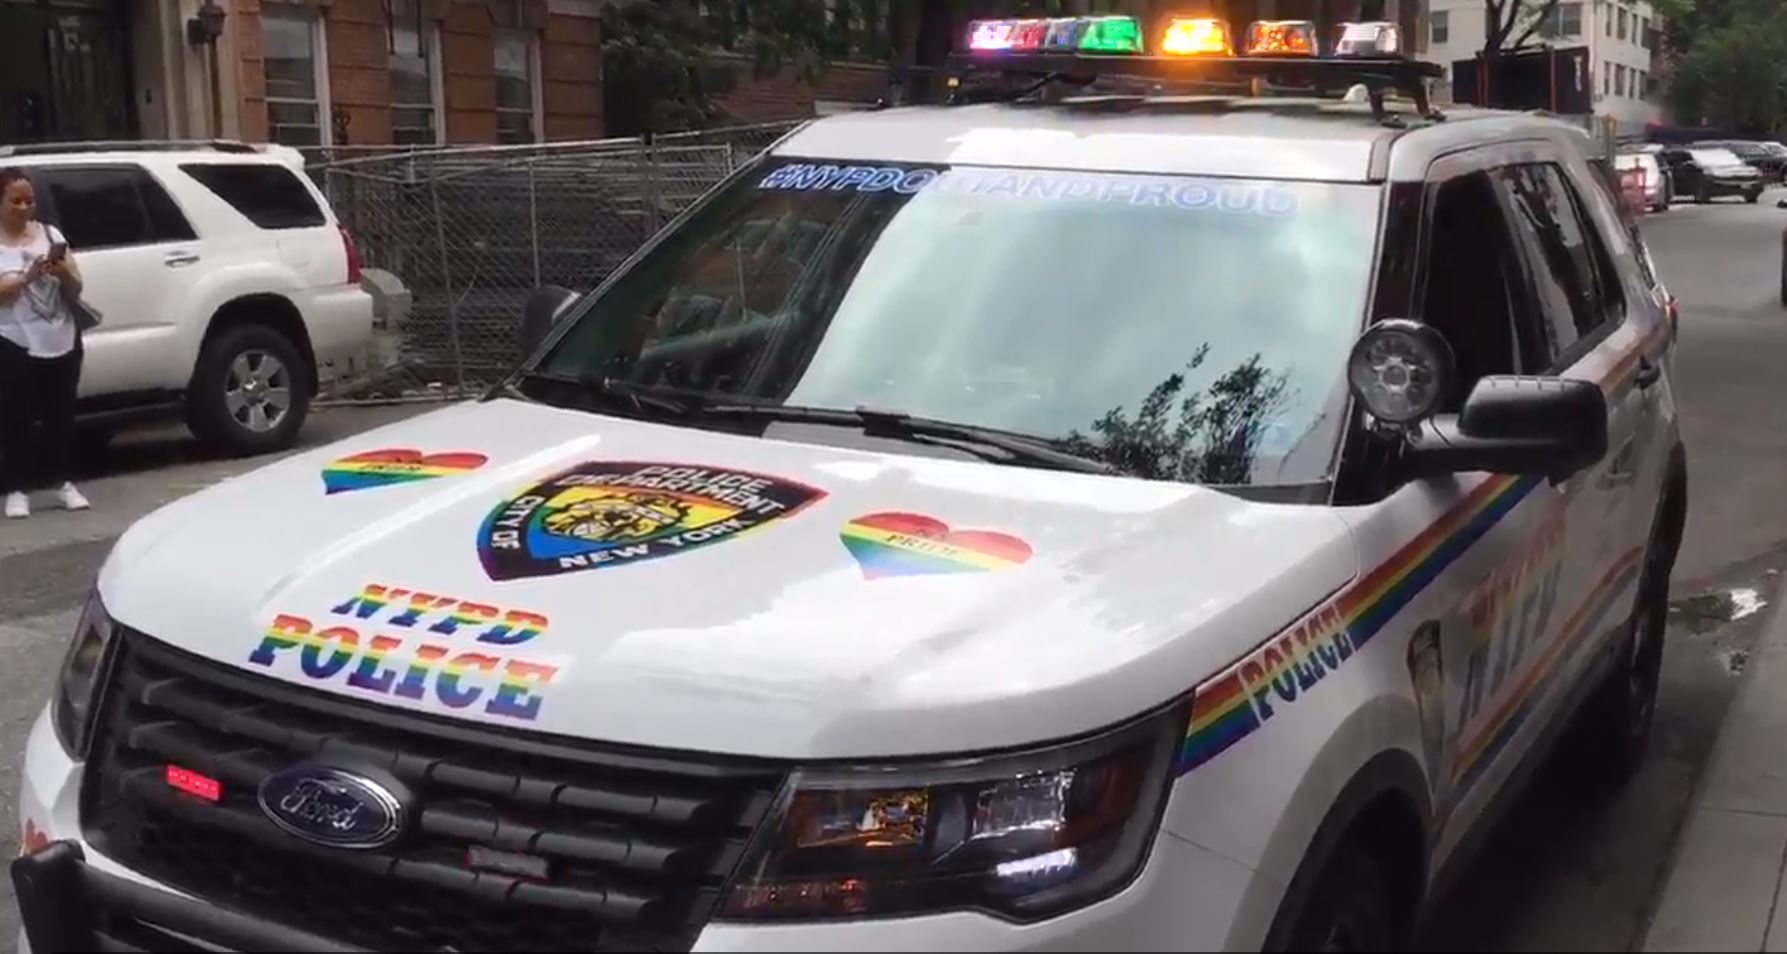 NYPD Honors Orlando Victims, Supports LGBT Community with New Pride